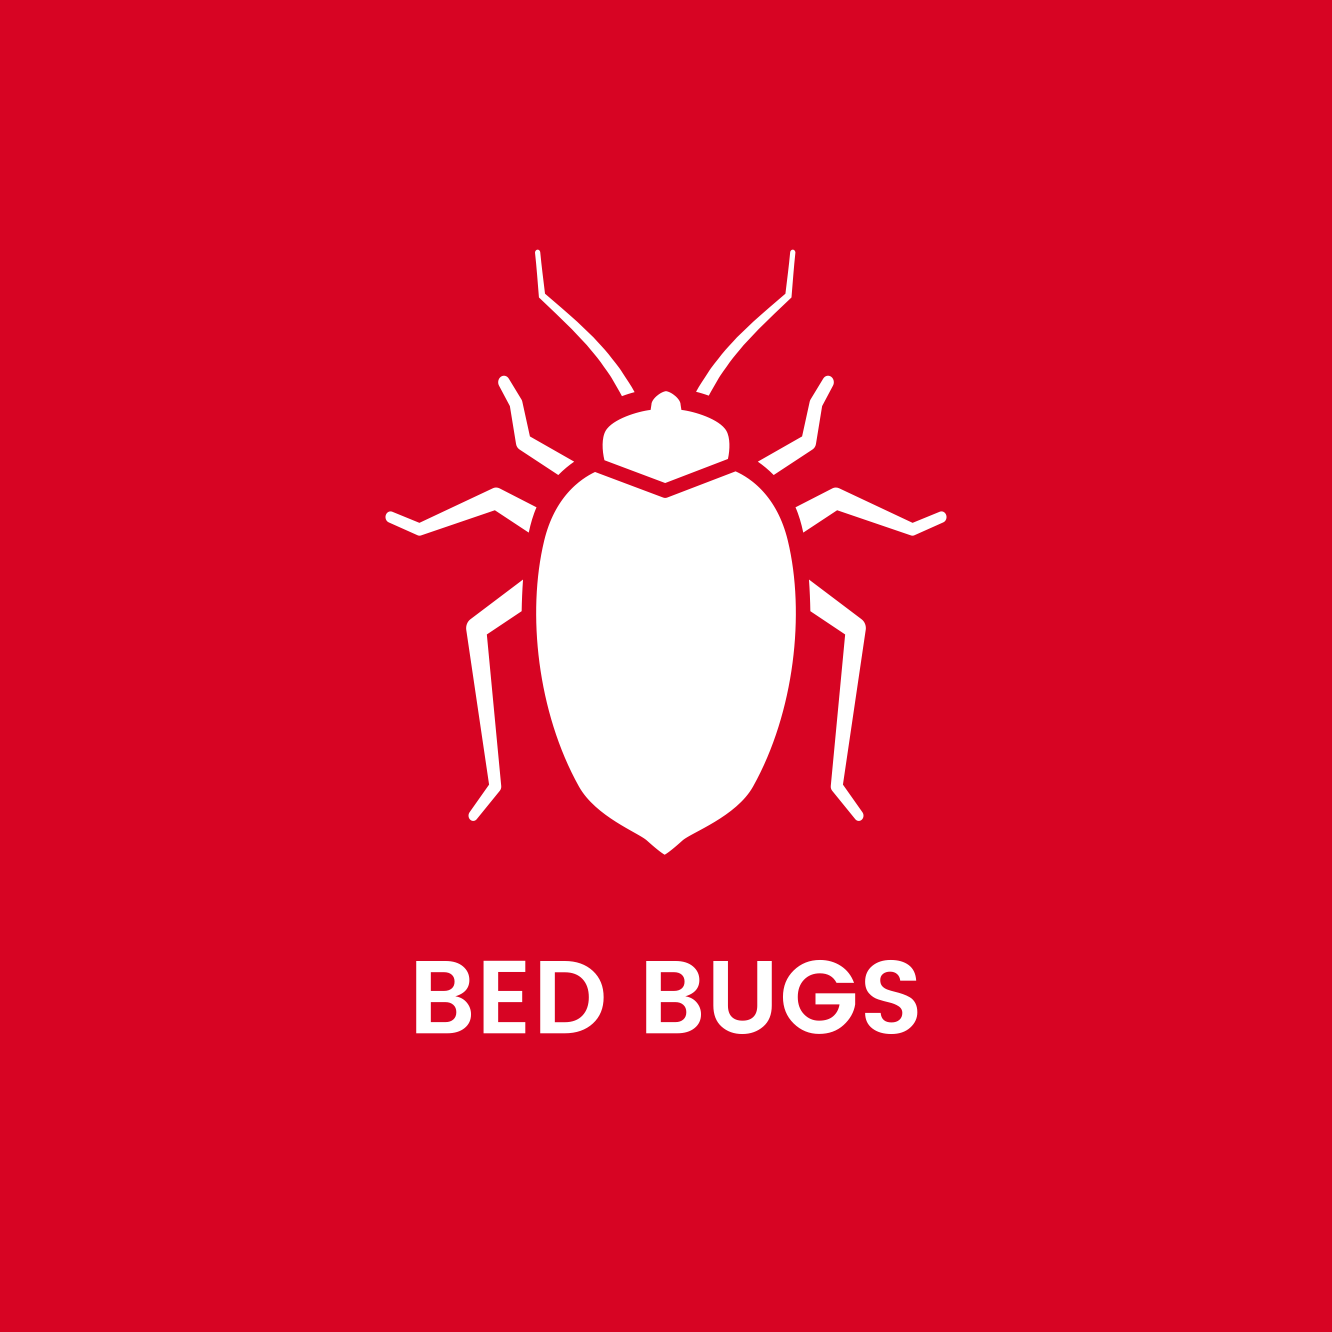 A bed bug icon on a red background with the words bed bugs below it.